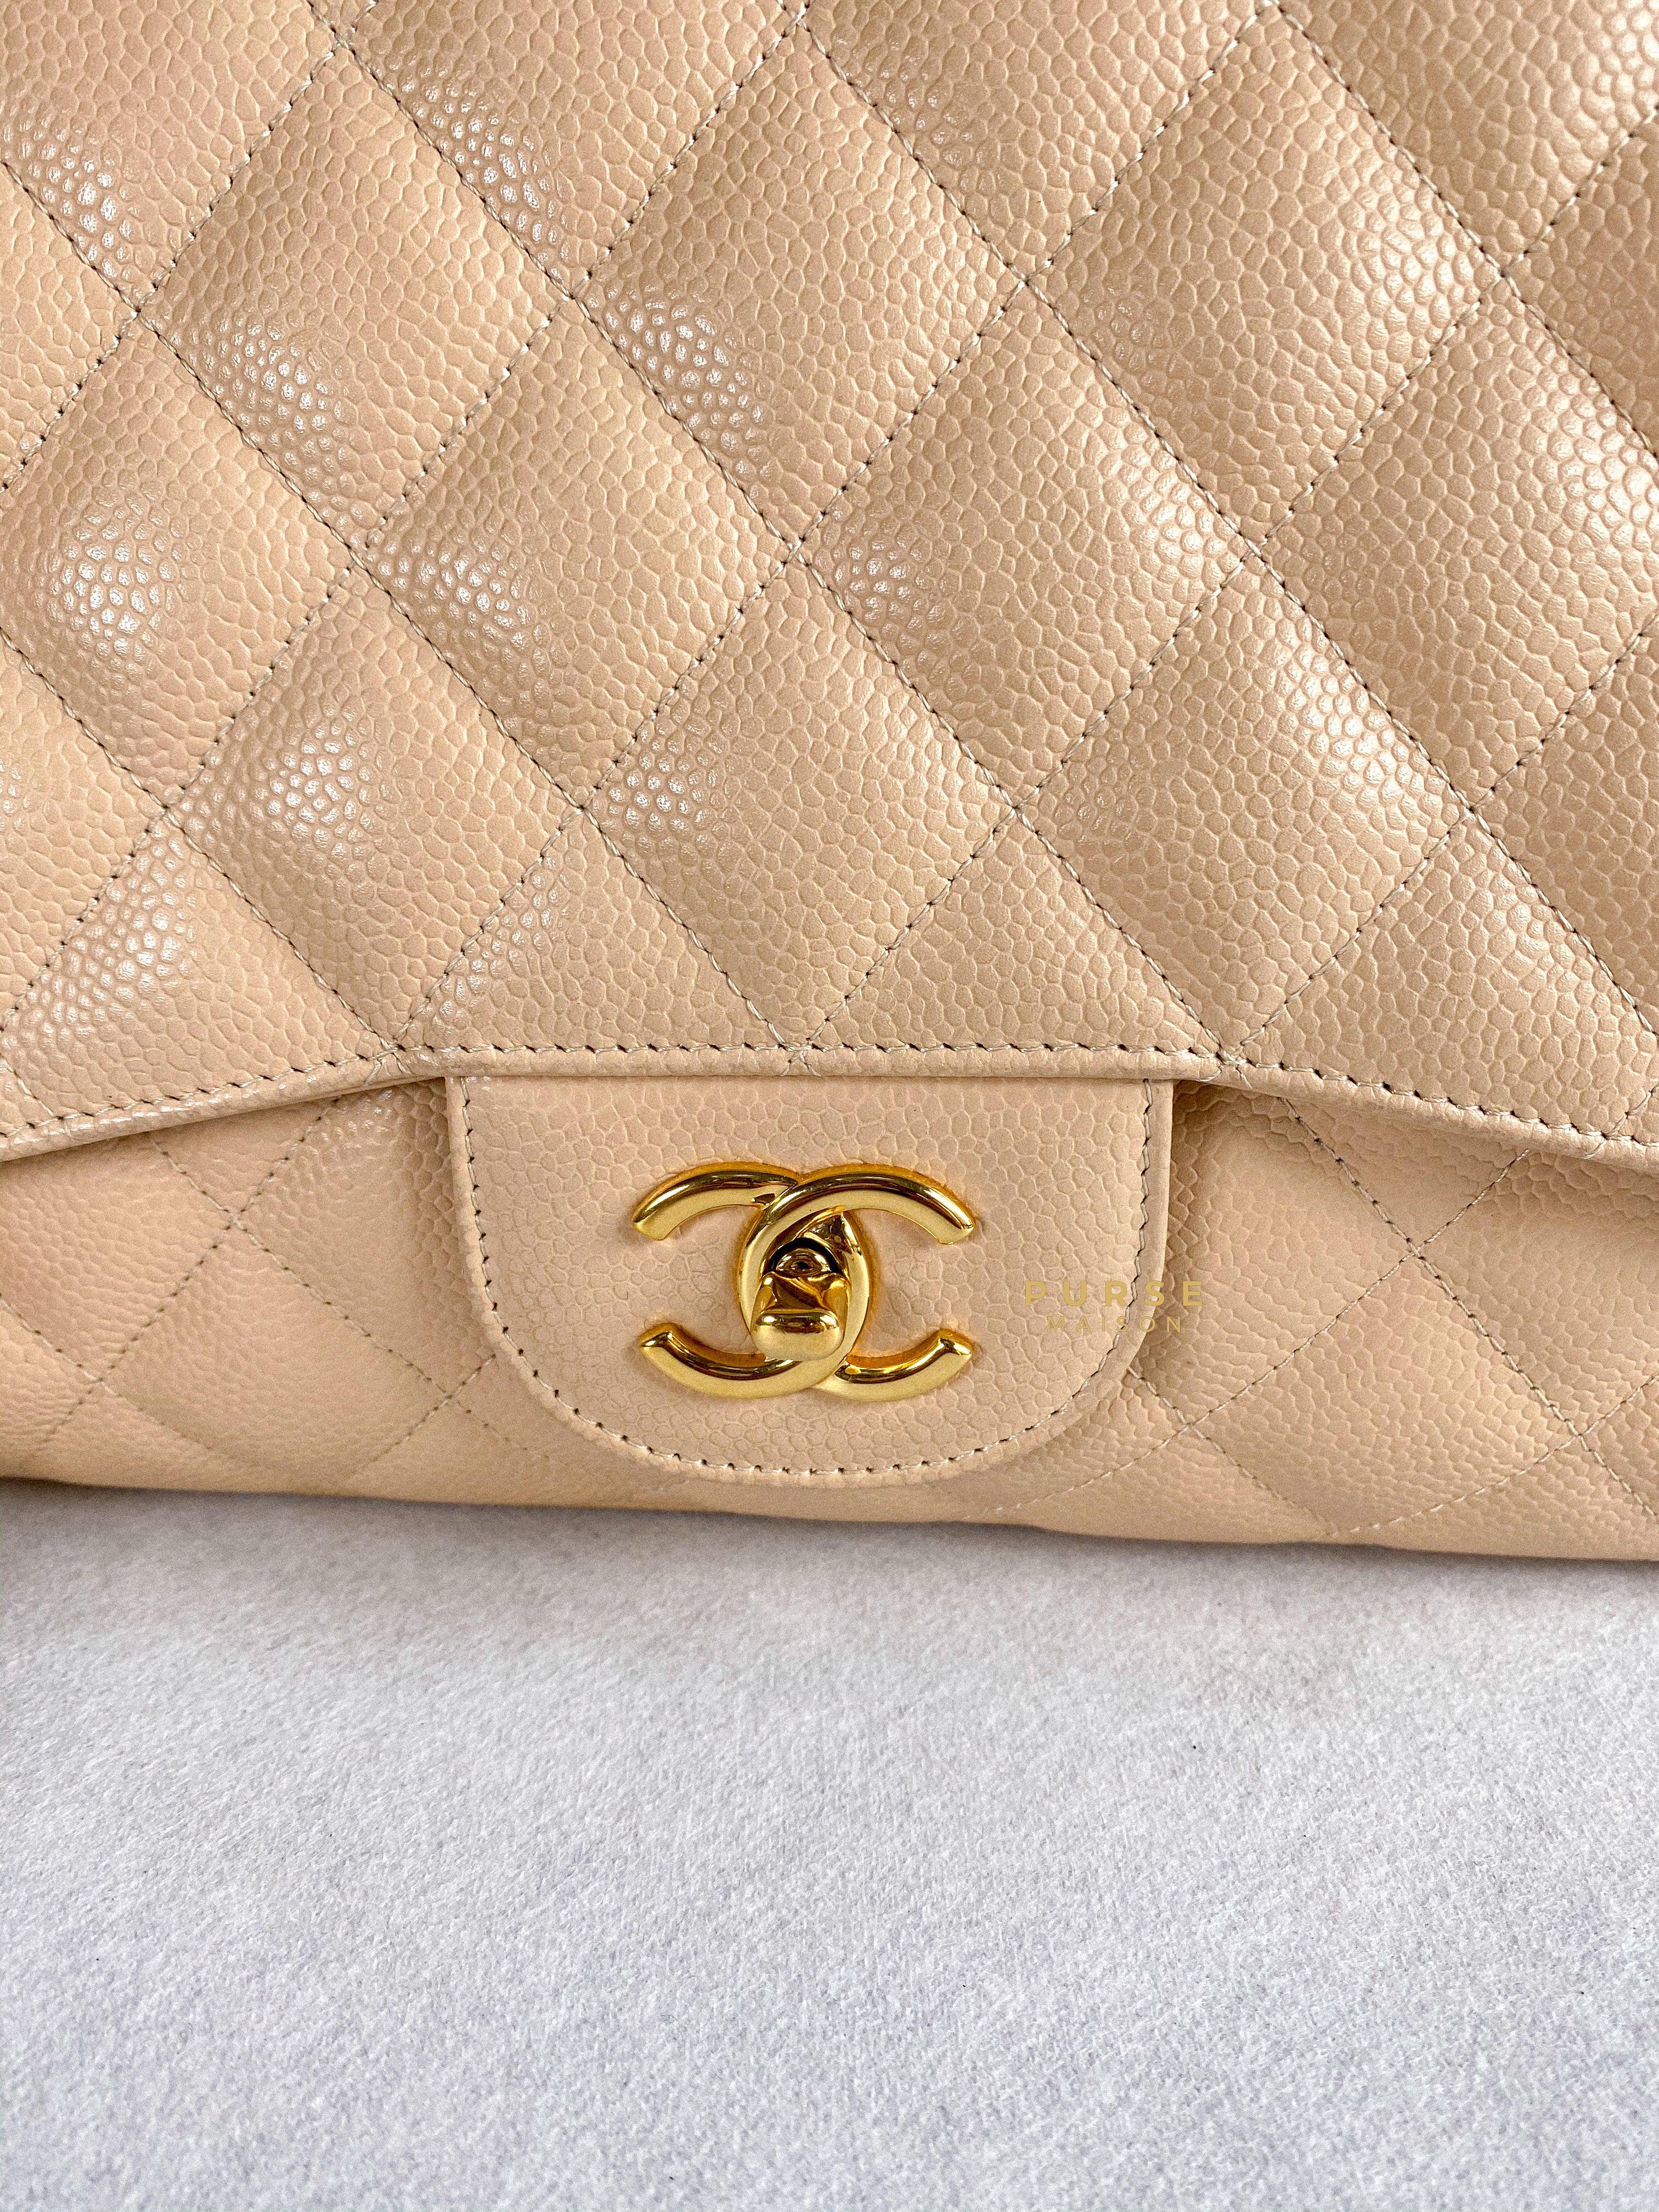 Chanel Classic Single Flap Jumbo in Beige Clair Quilted Caviar and Gold Hardware (Series 13) | Purse Maison Luxury Bags Shop